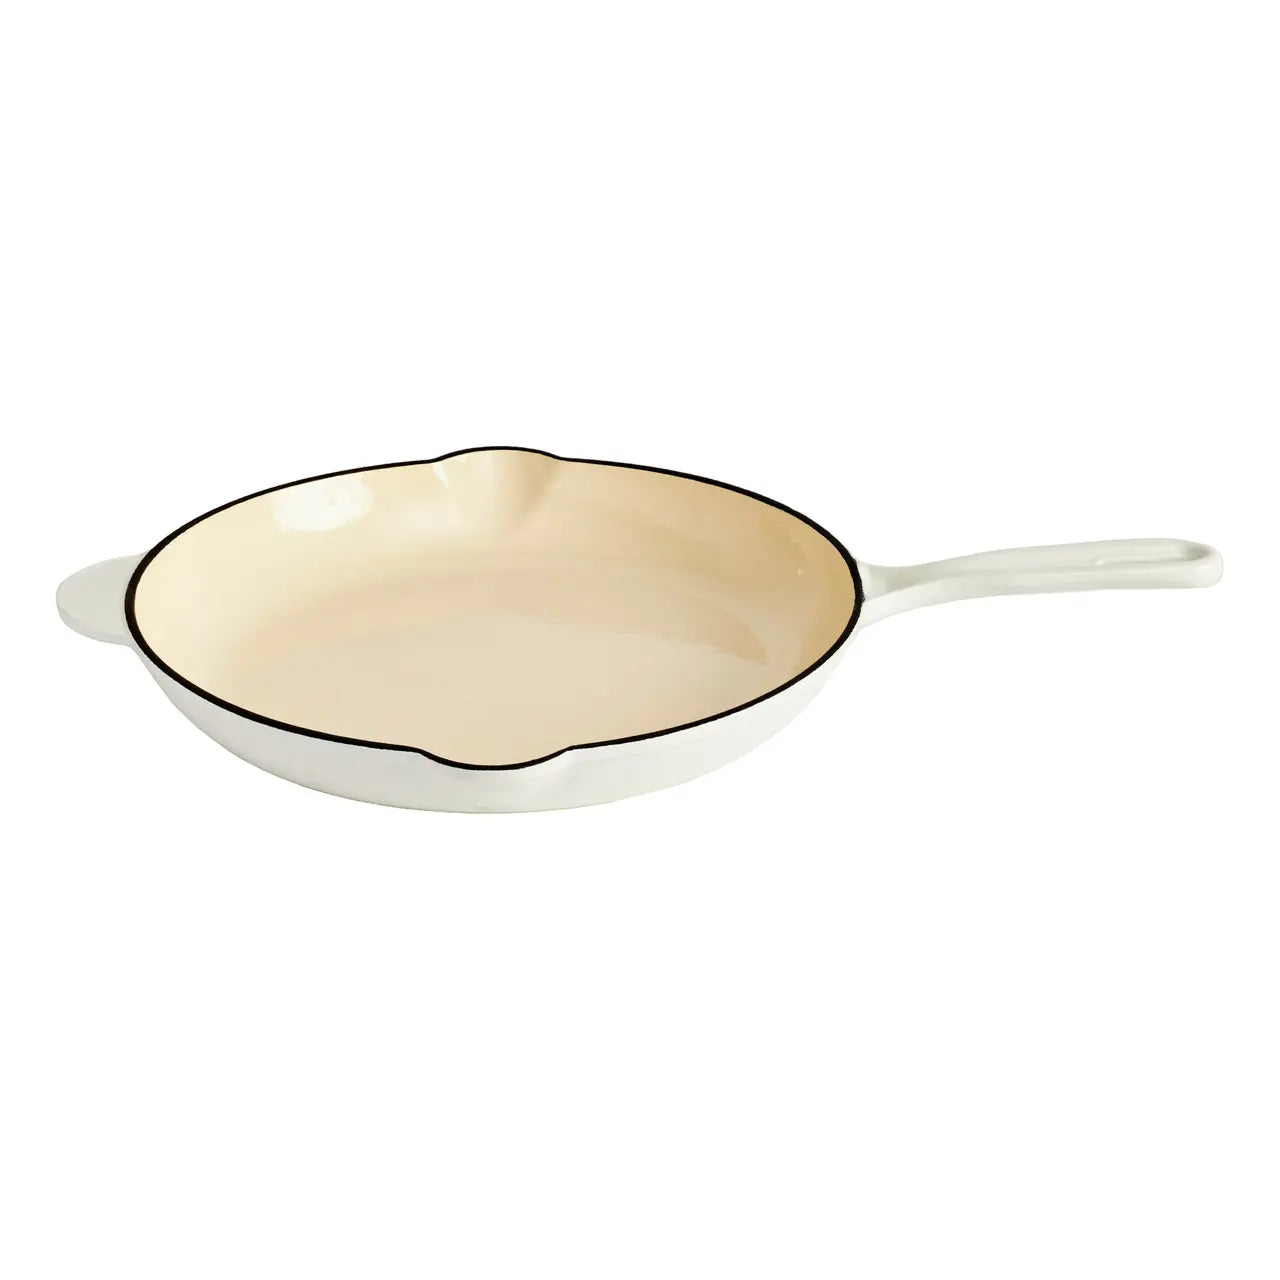 Enameled Cast Iron 12 inch Skillet in White